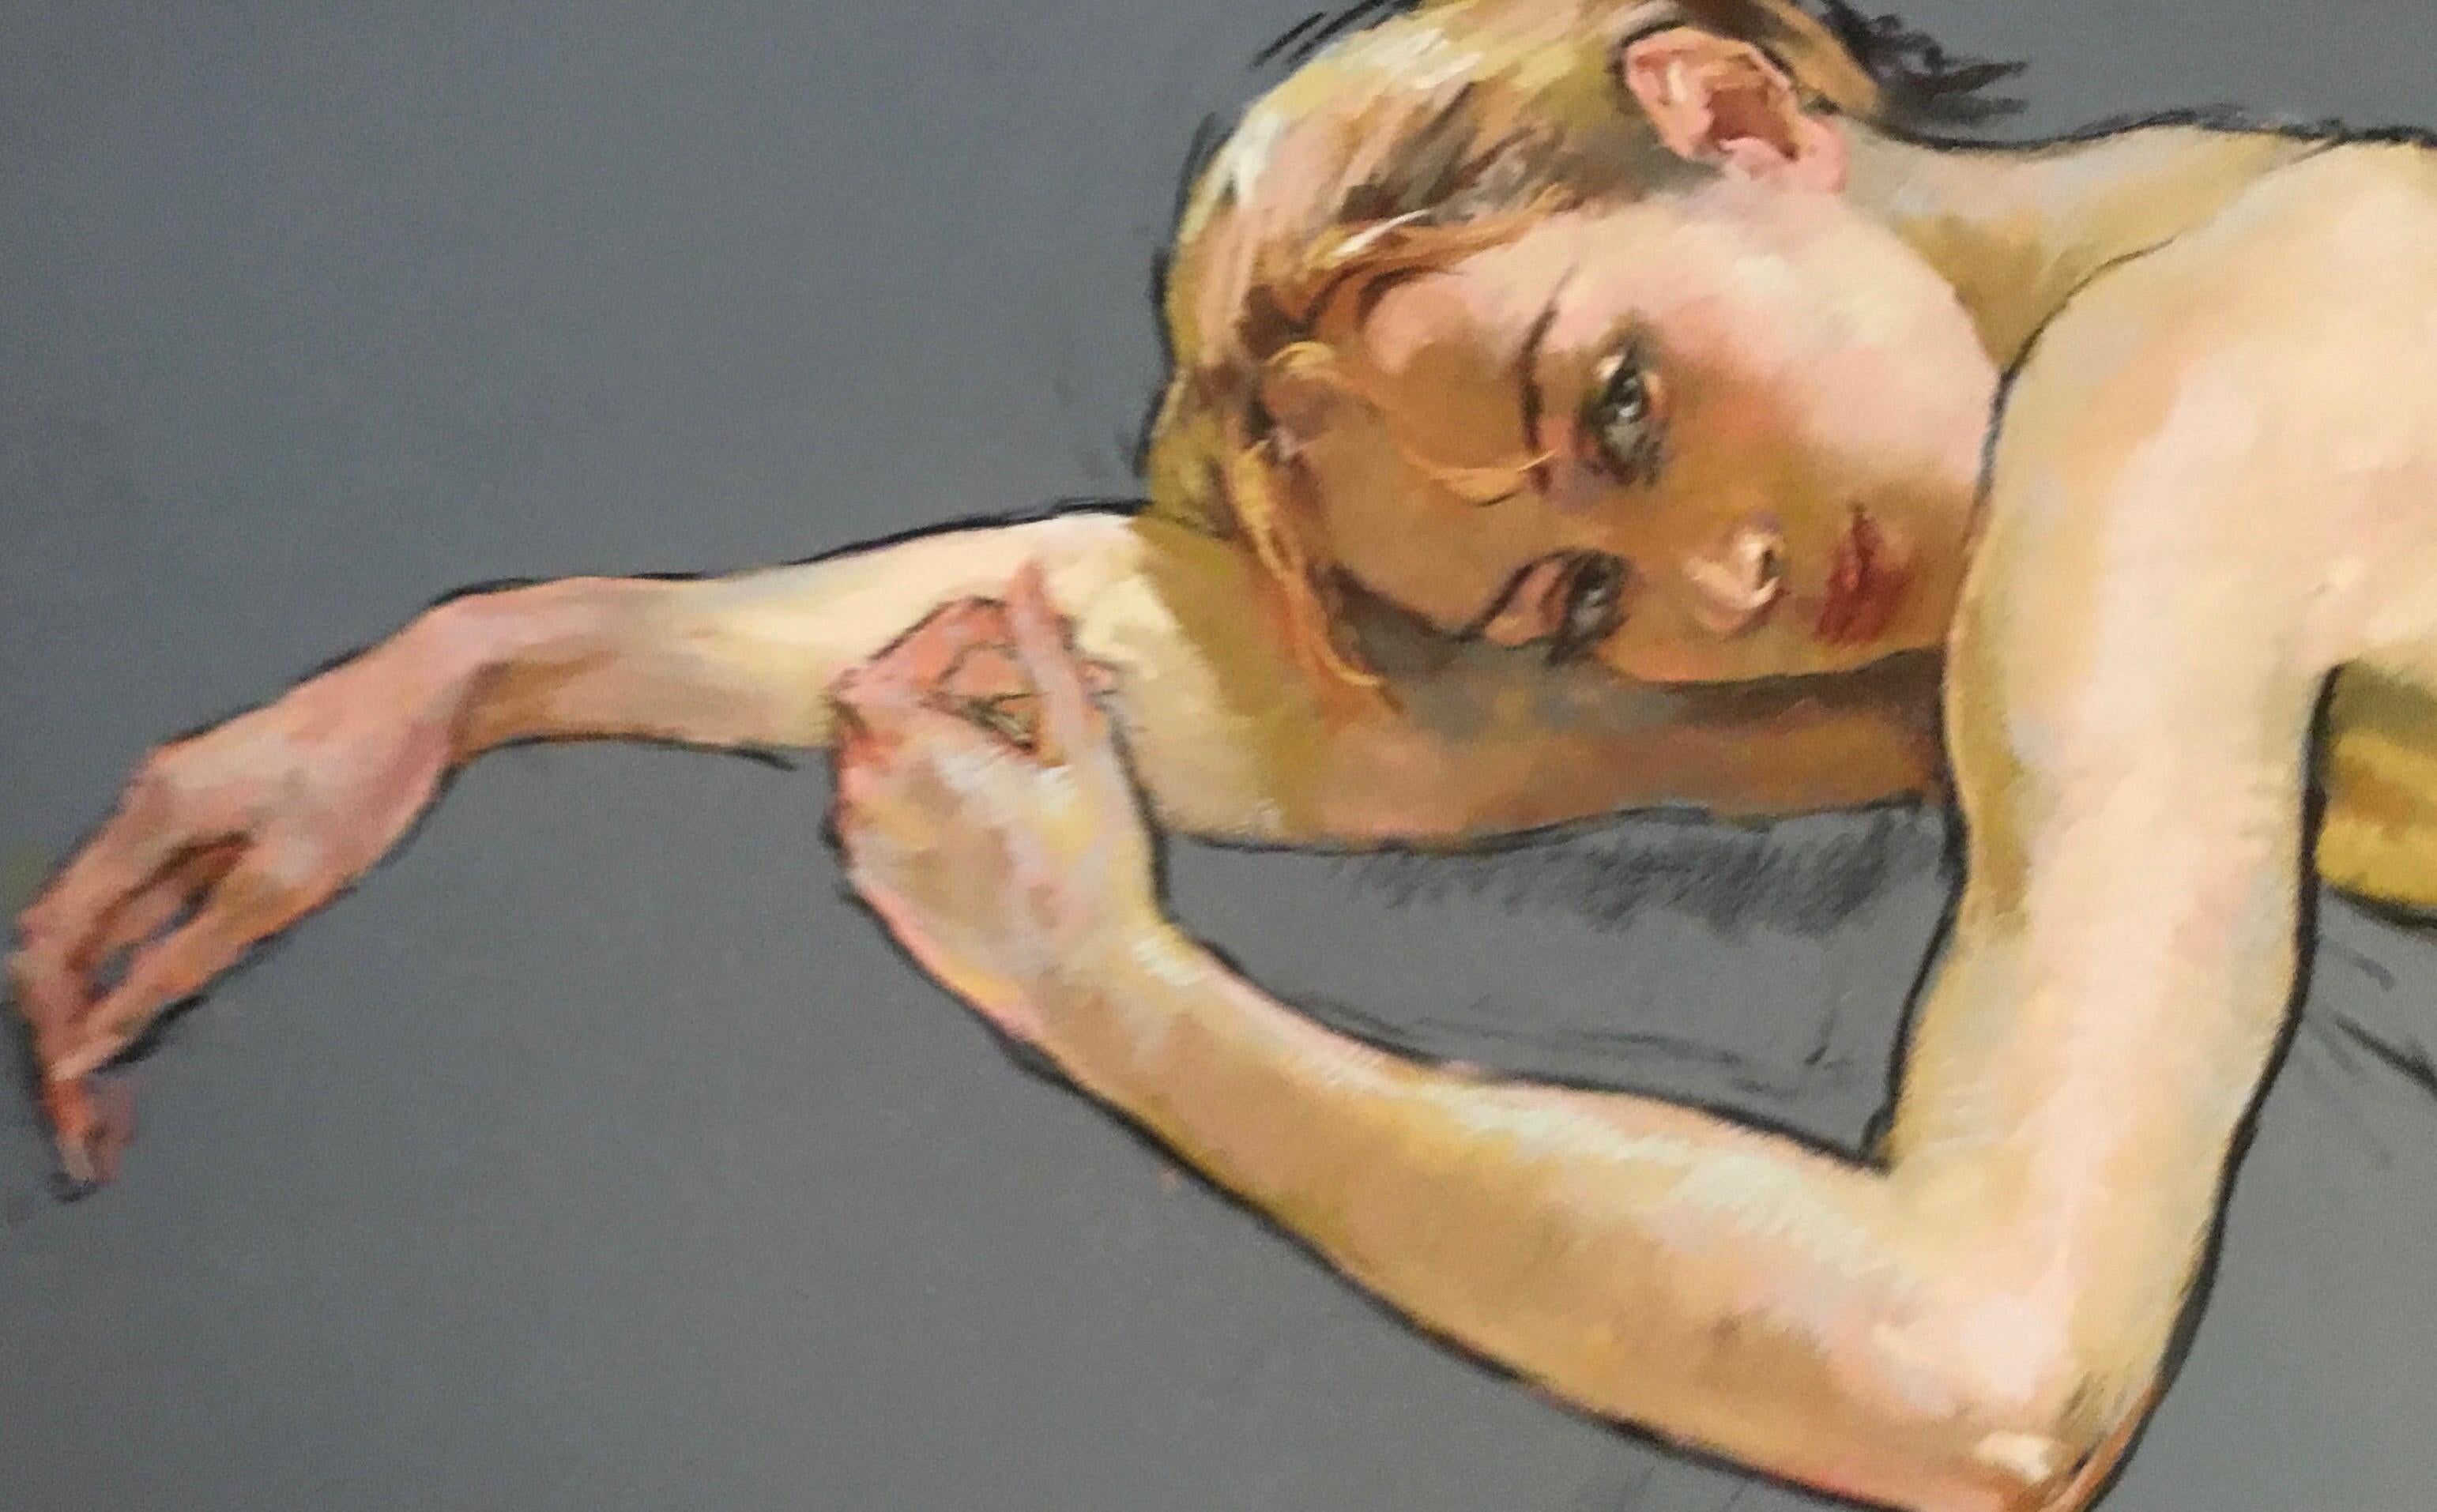 View works.Katya Gridneva
OLGA RESTING
VIEW WORKS
SHARE
Katya Gridneva was born in 1965 in the Ukraine. As a child she loved to draw and paint, however, this talent was set aside when she was selected to be a gymnast at one of Russia’s prestigious